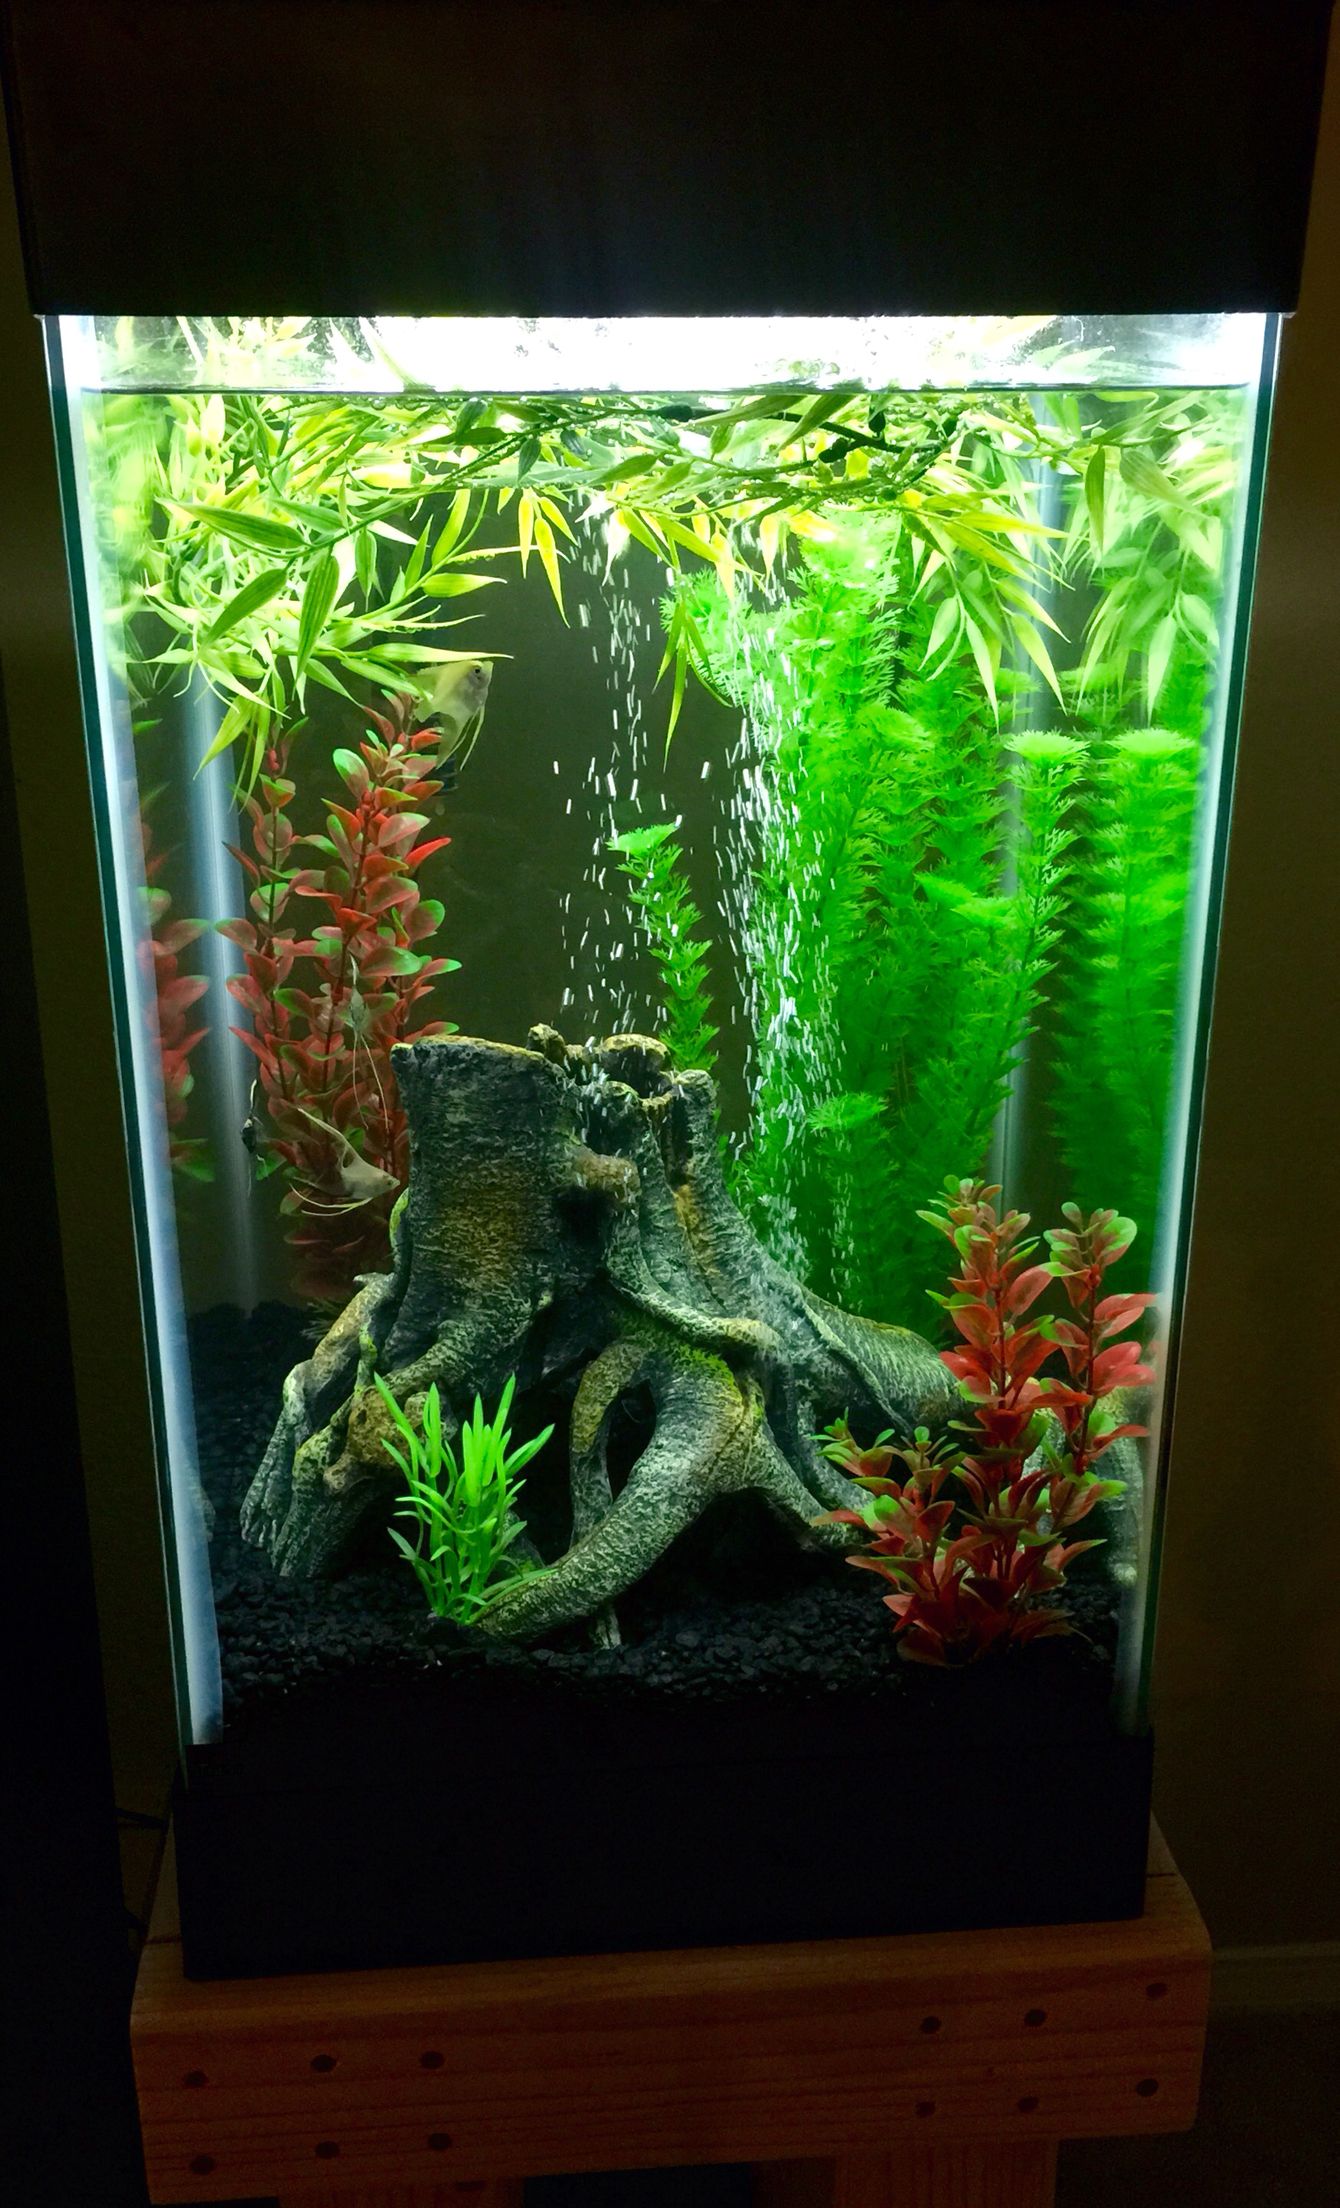 Beautifully decorated 15-gallon betta fish tank with live plants and decorations